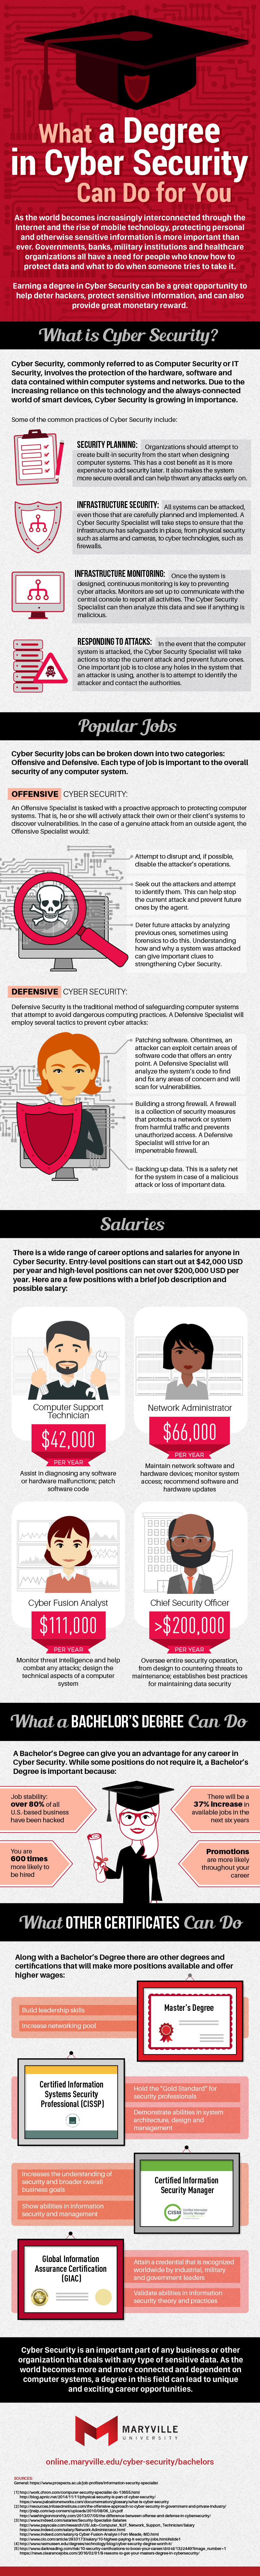 What a Degree in Cyber Security Can Do for You Infographic